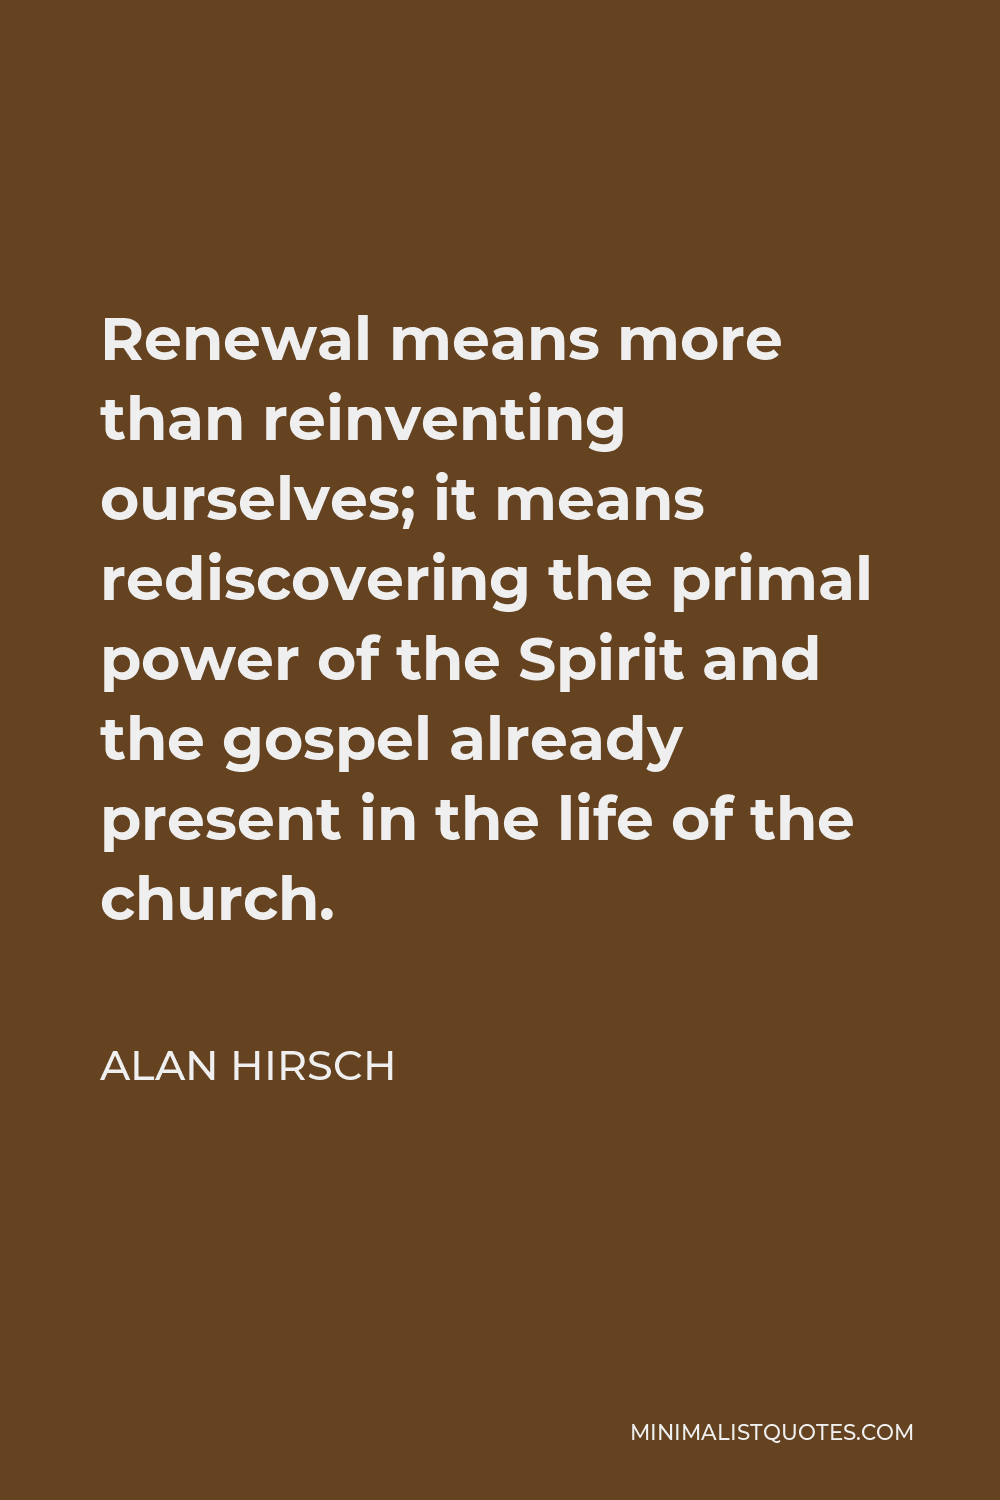 Alan Hirsch Quote - Renewal means more than reinventing ourselves; it means rediscovering the primal power of the Spirit and the gospel already present in the life of the church.